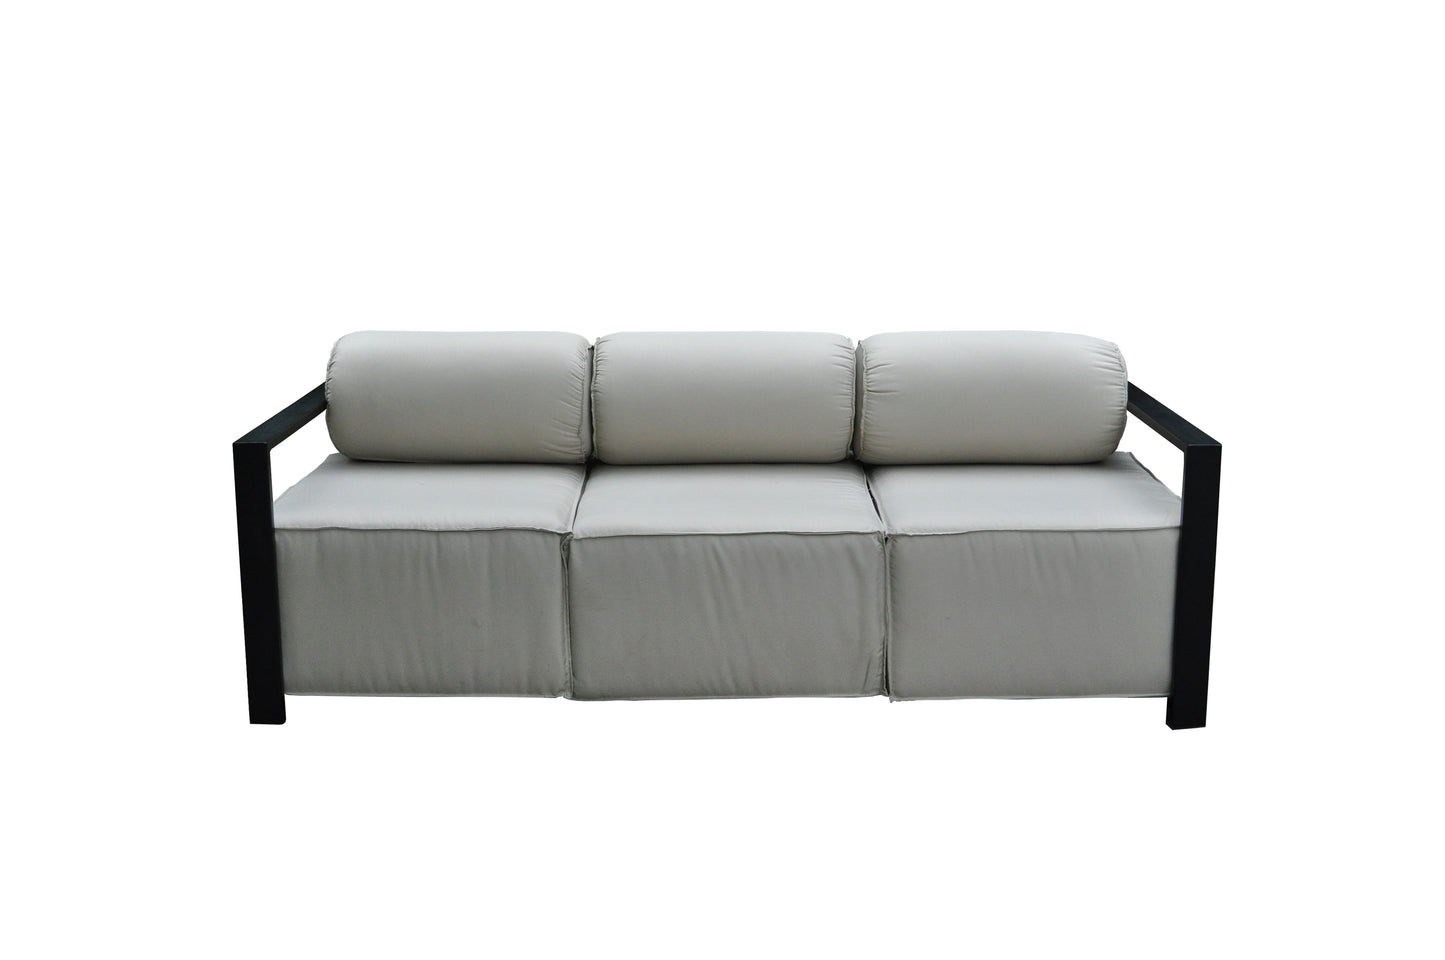 Volantes Outdoor 3-Piece Sofa, Loveseat, and Chair Set